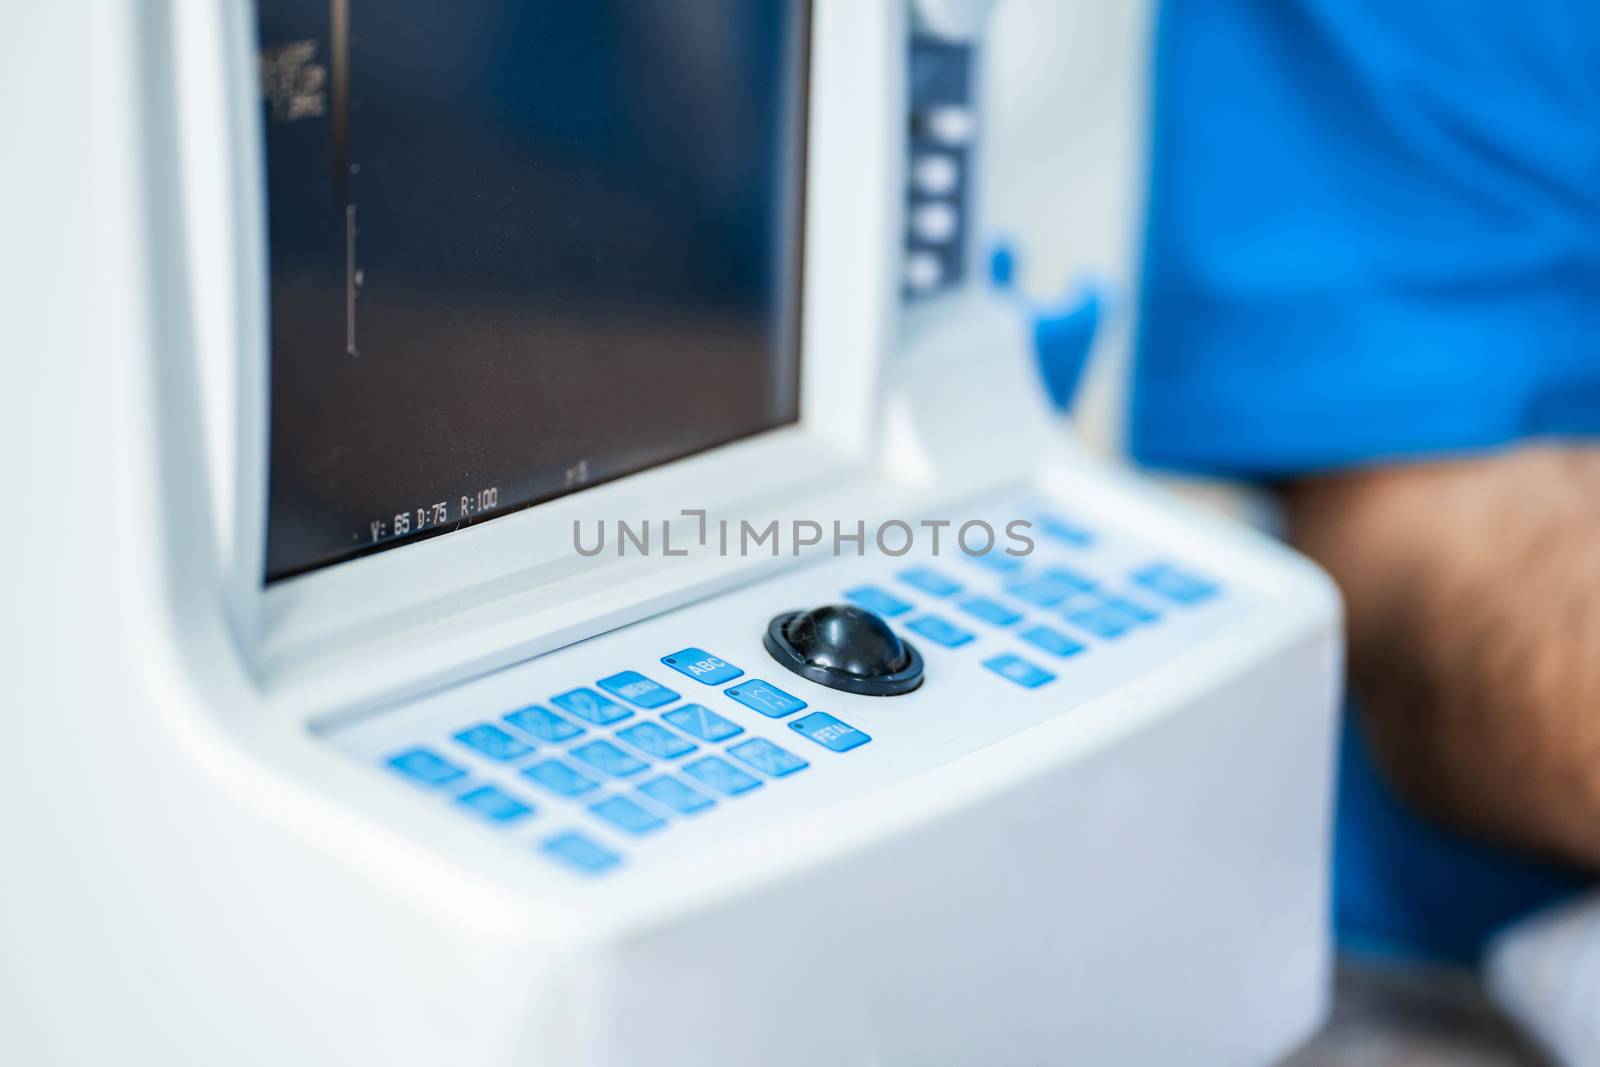 professional equipment of veterinary clinics. A mobile ultrasound diagnostic device for animals